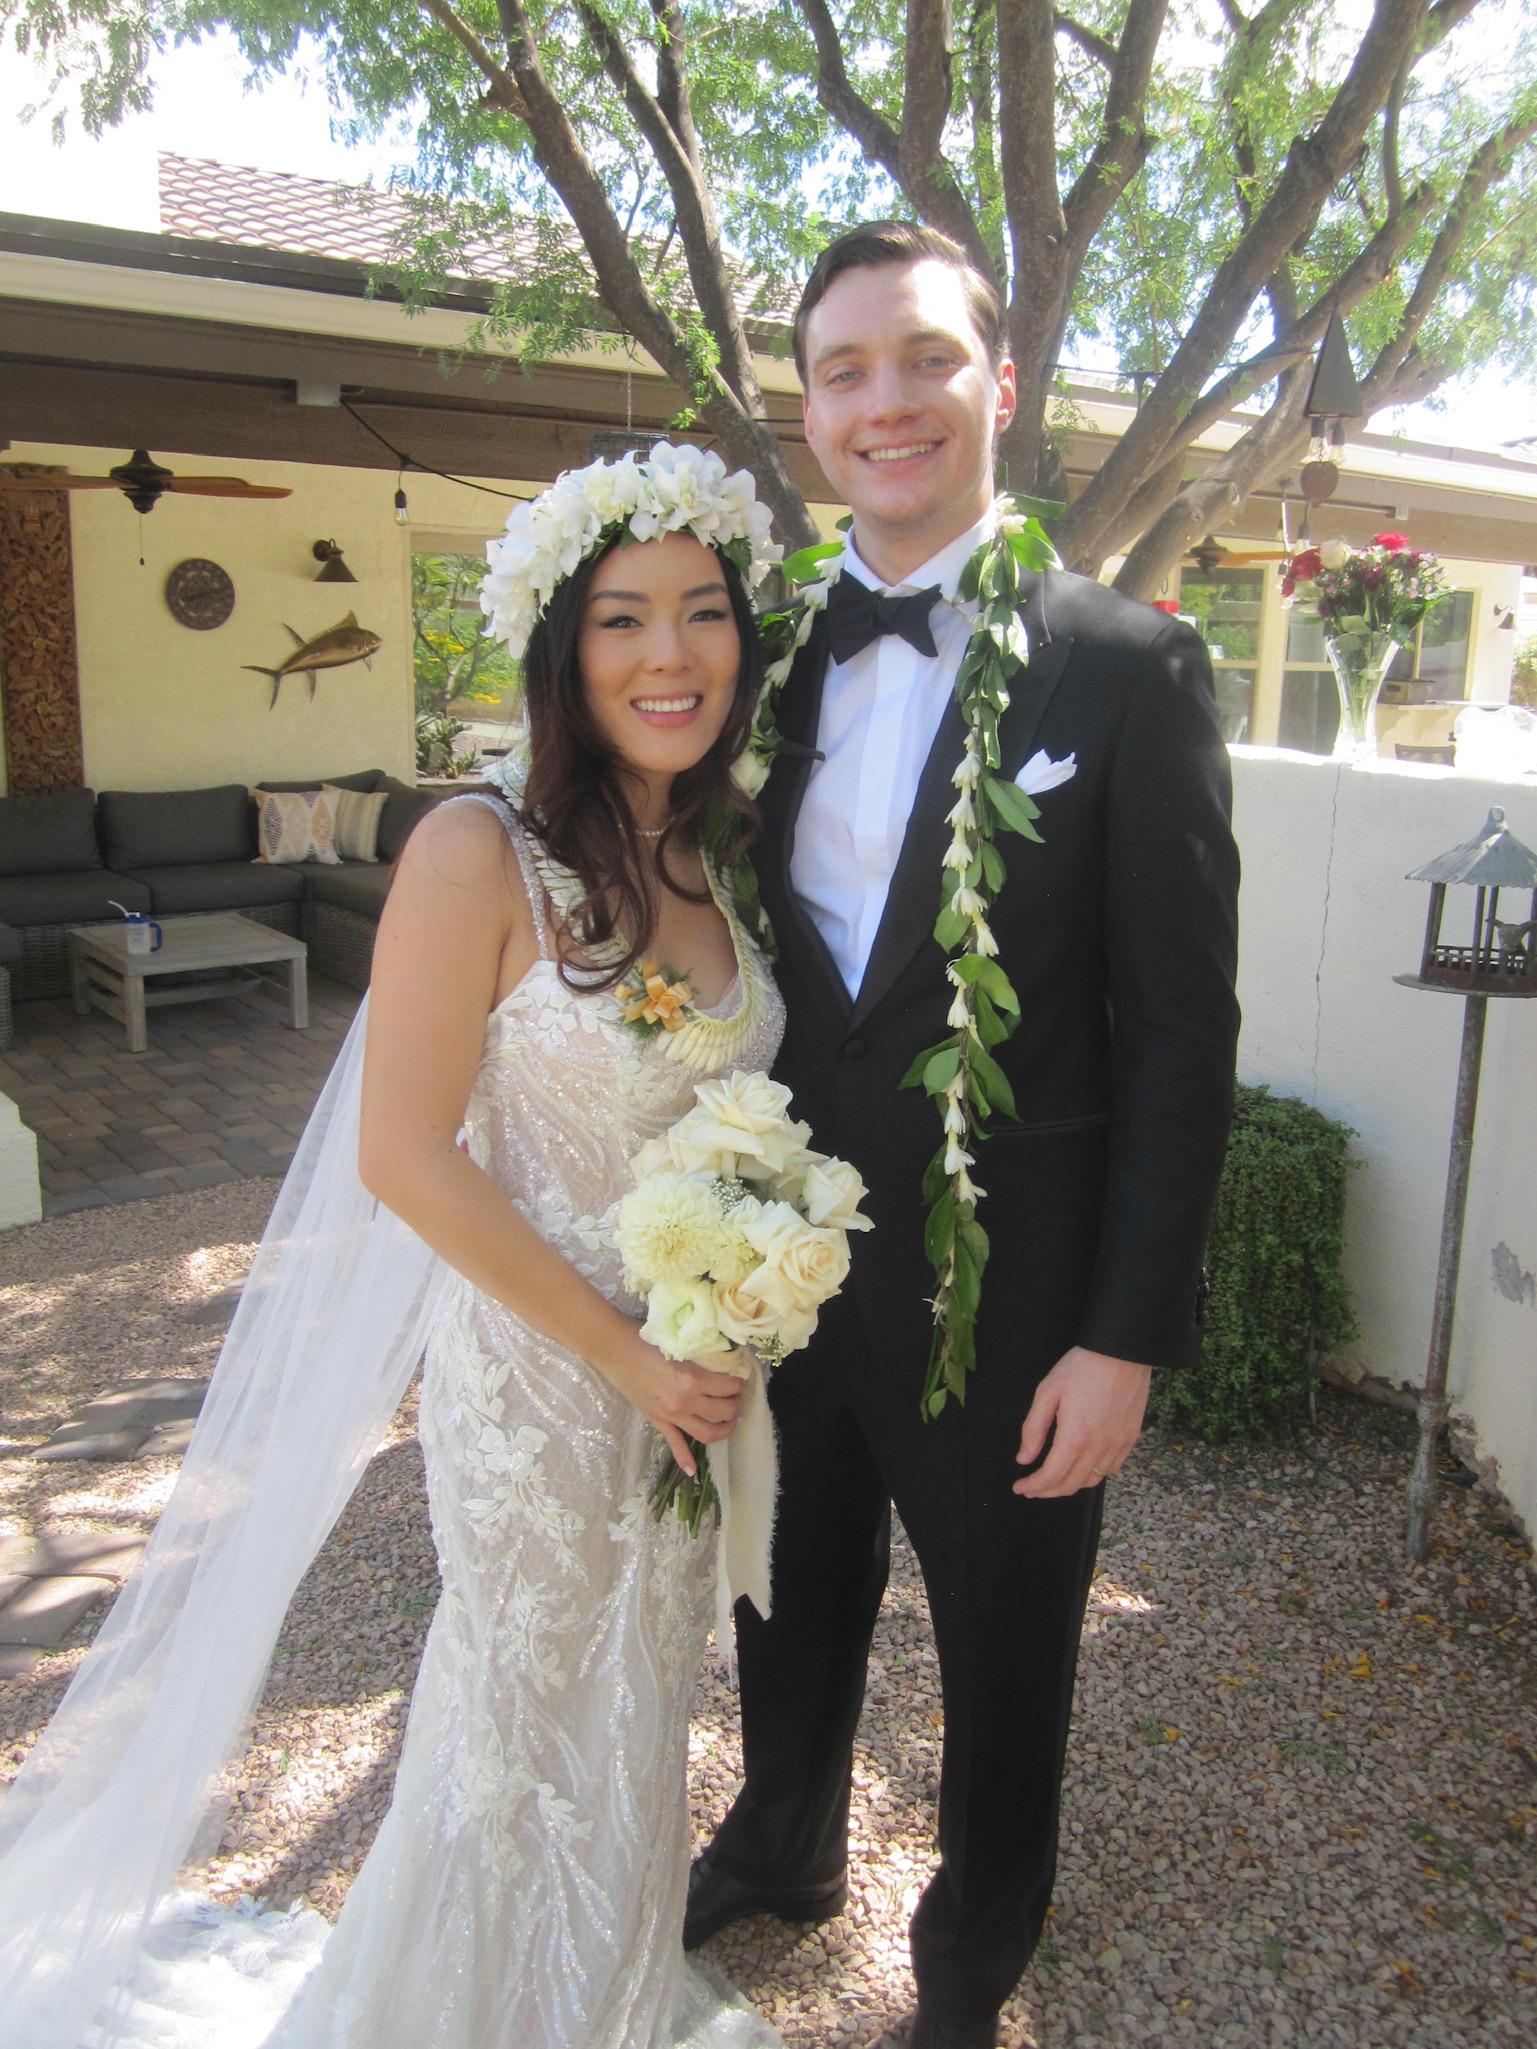 The Wedding Website of Allison Marich and Andrew Marich